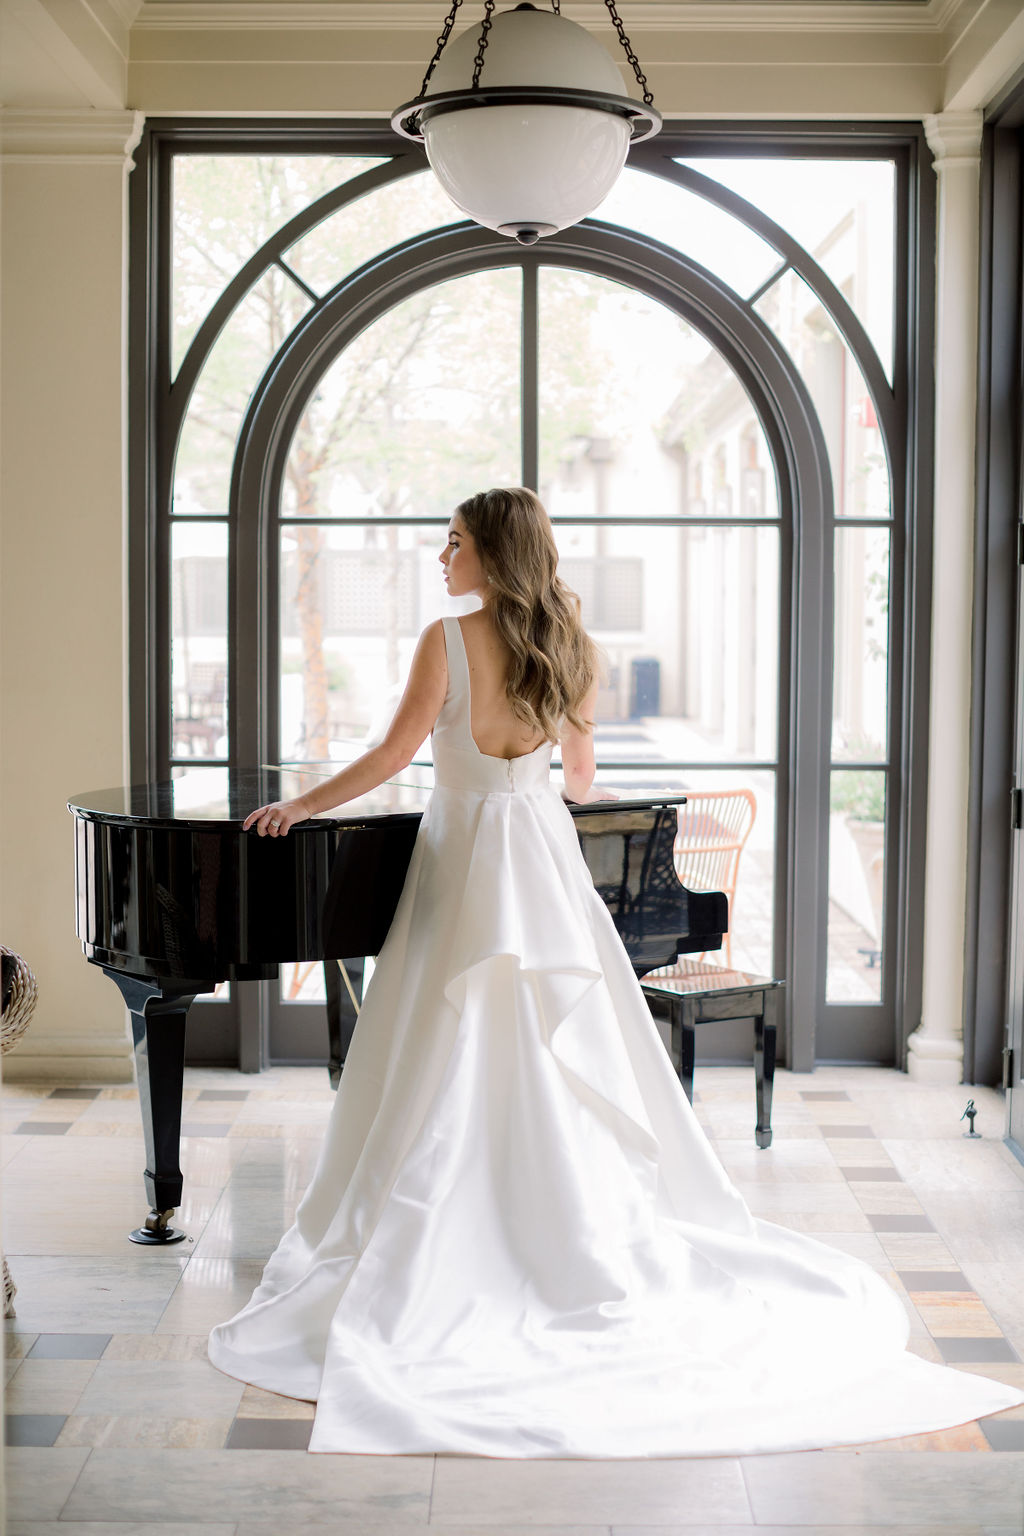 Bride wearing silk crepe bridal gown from I Do Bridal Couture. Photo: Emily Songer Photography